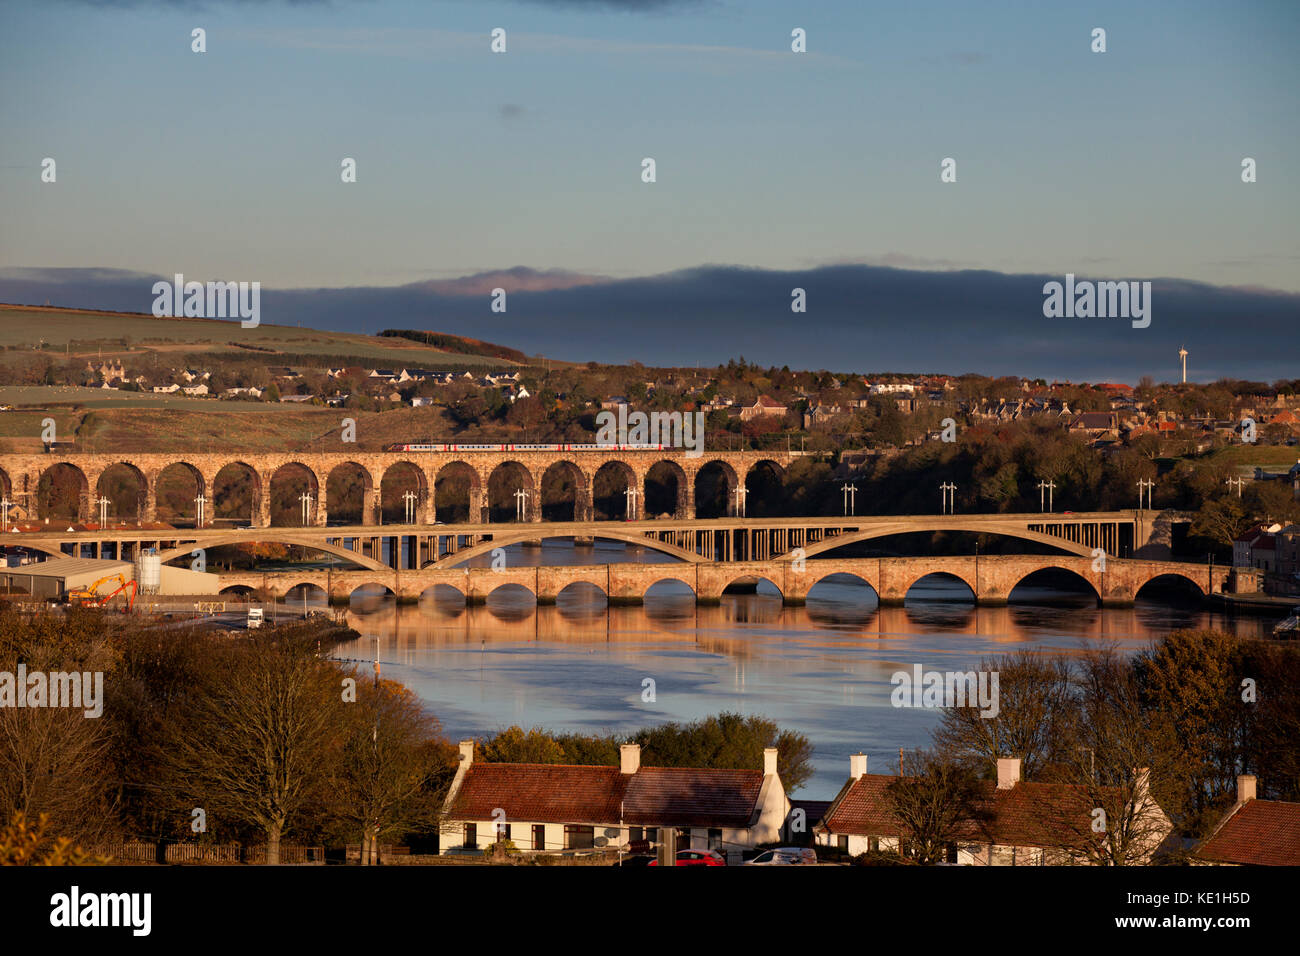 Bridges over the river tweed,Berwick upon Tweed An Arriva Crosscountry train crosses the Royal border bridge in the background. Stock Photo